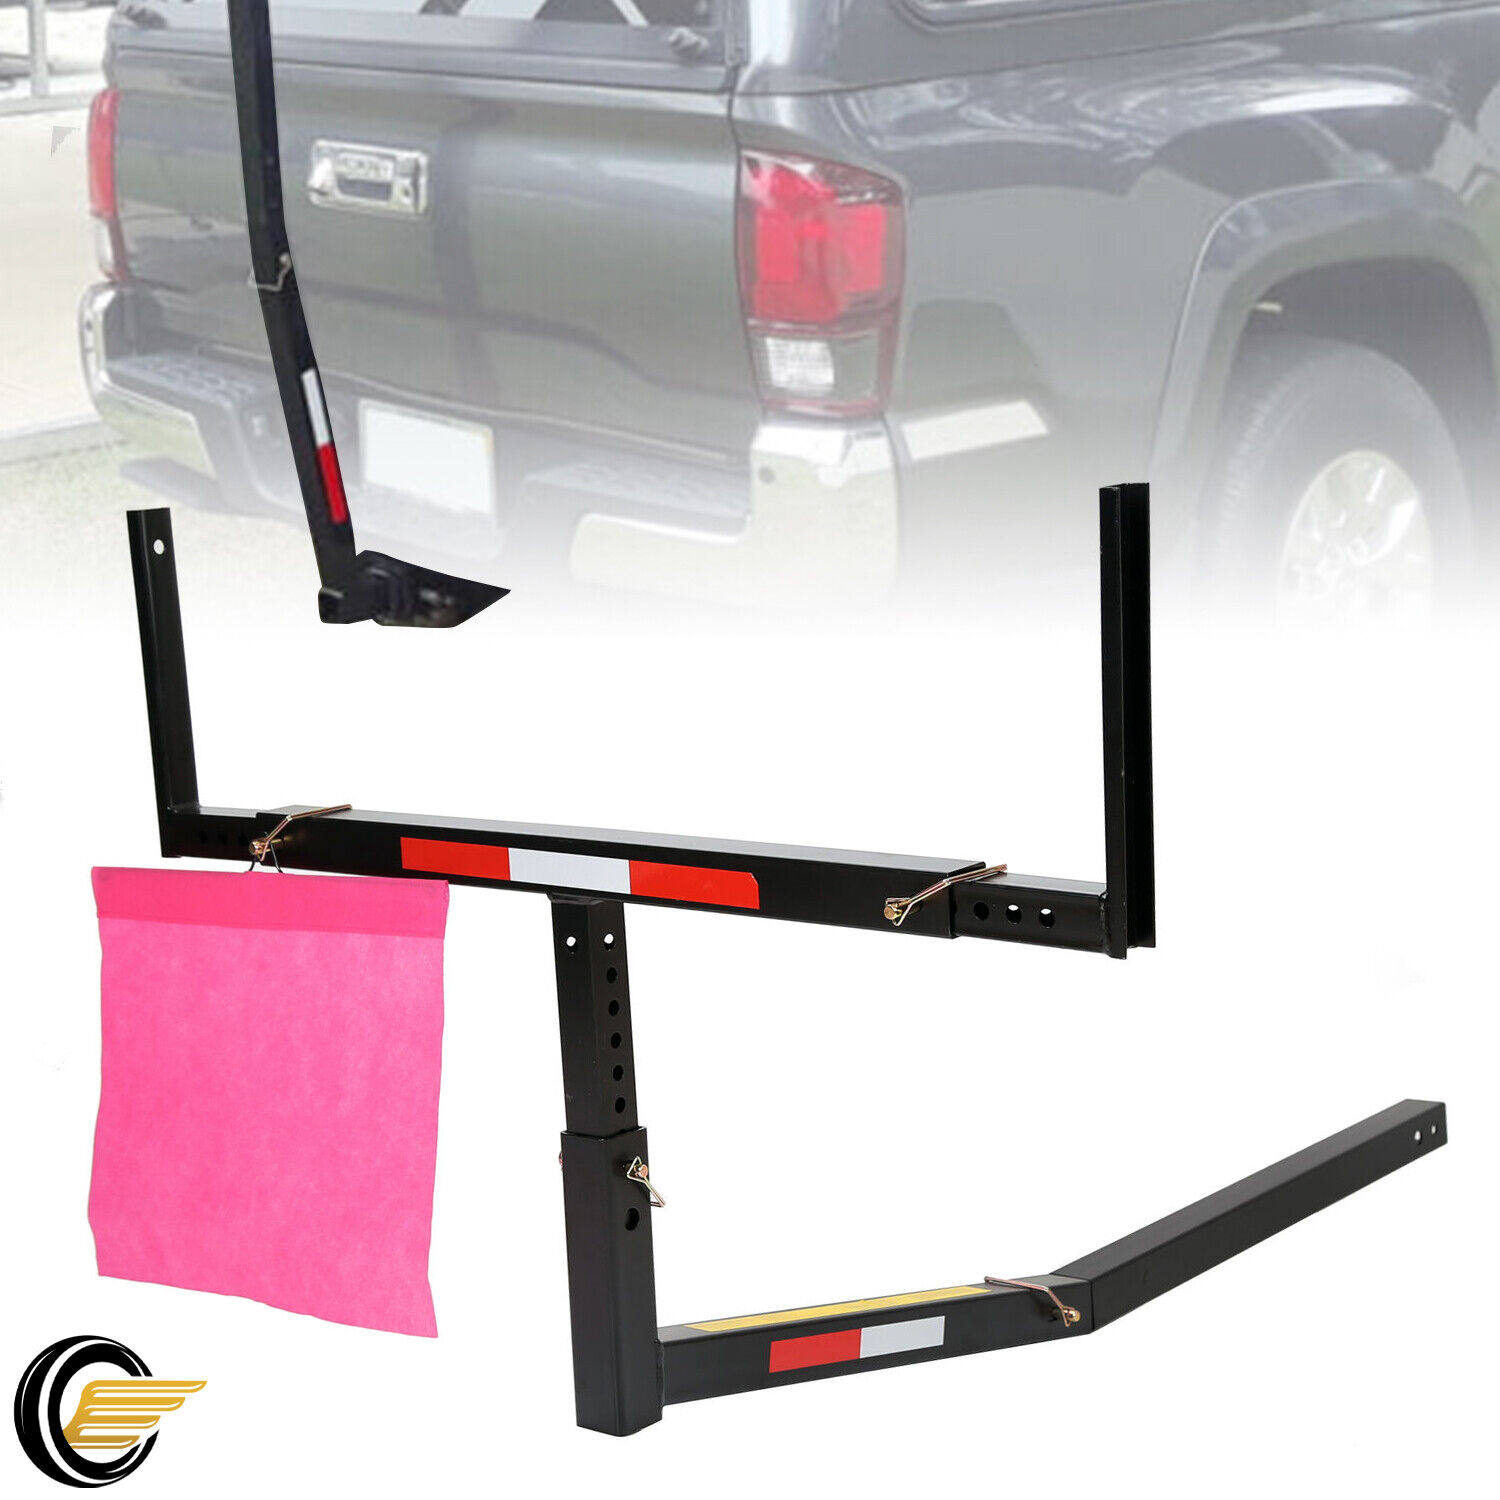 Truck Bed Hitch Extender Extension Rack Boat Canoe Kayak Lumber Long Pipes